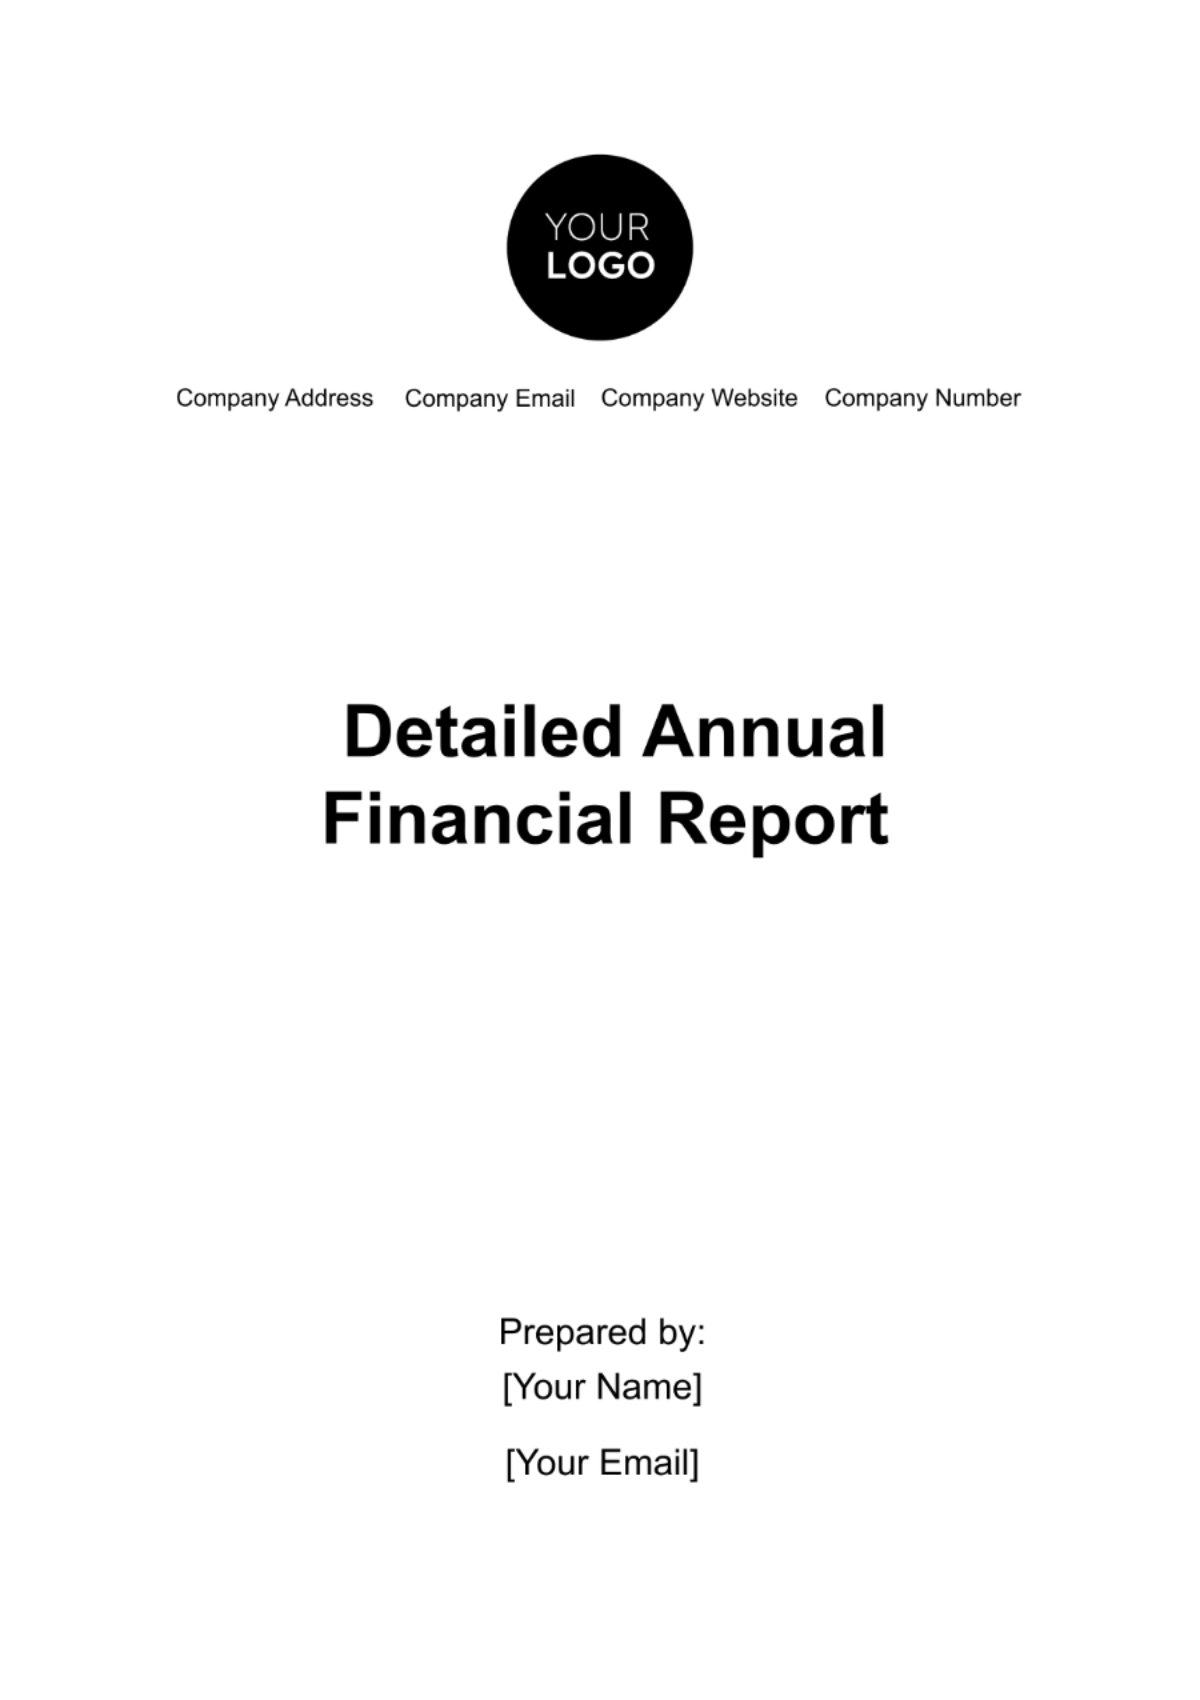 Detailed Annual Financial Report Template